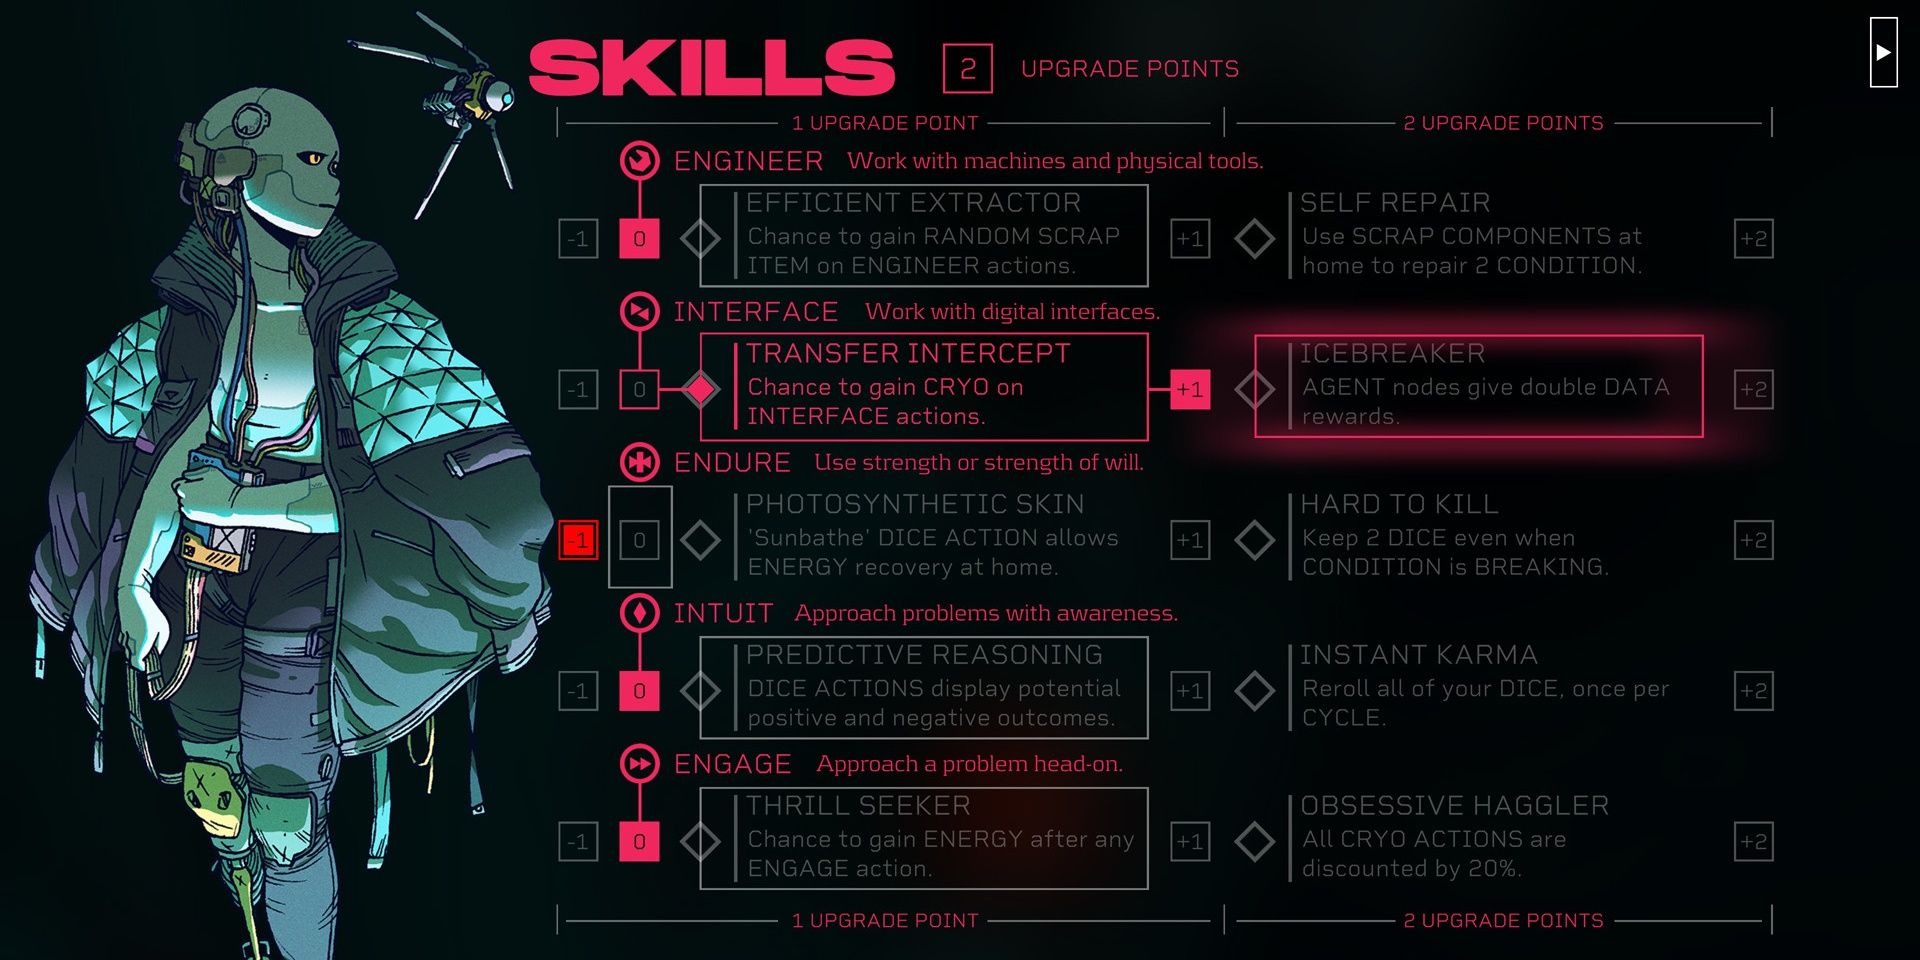 An image showing a character with a list of its skills